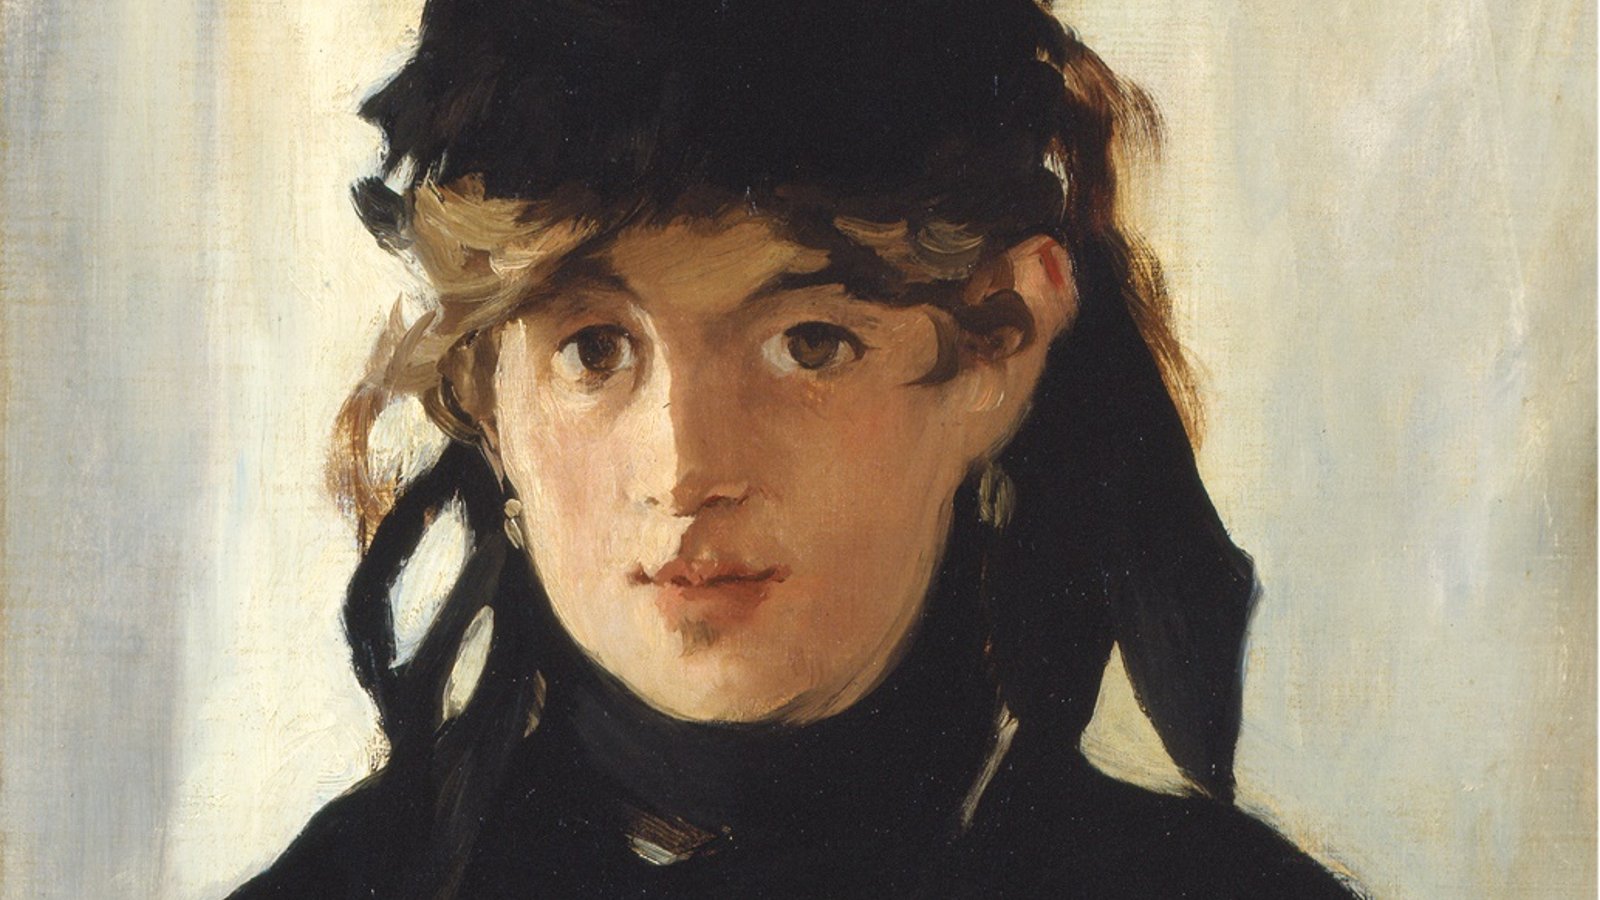 Exhibition on Screen - Manet: Portraying Life